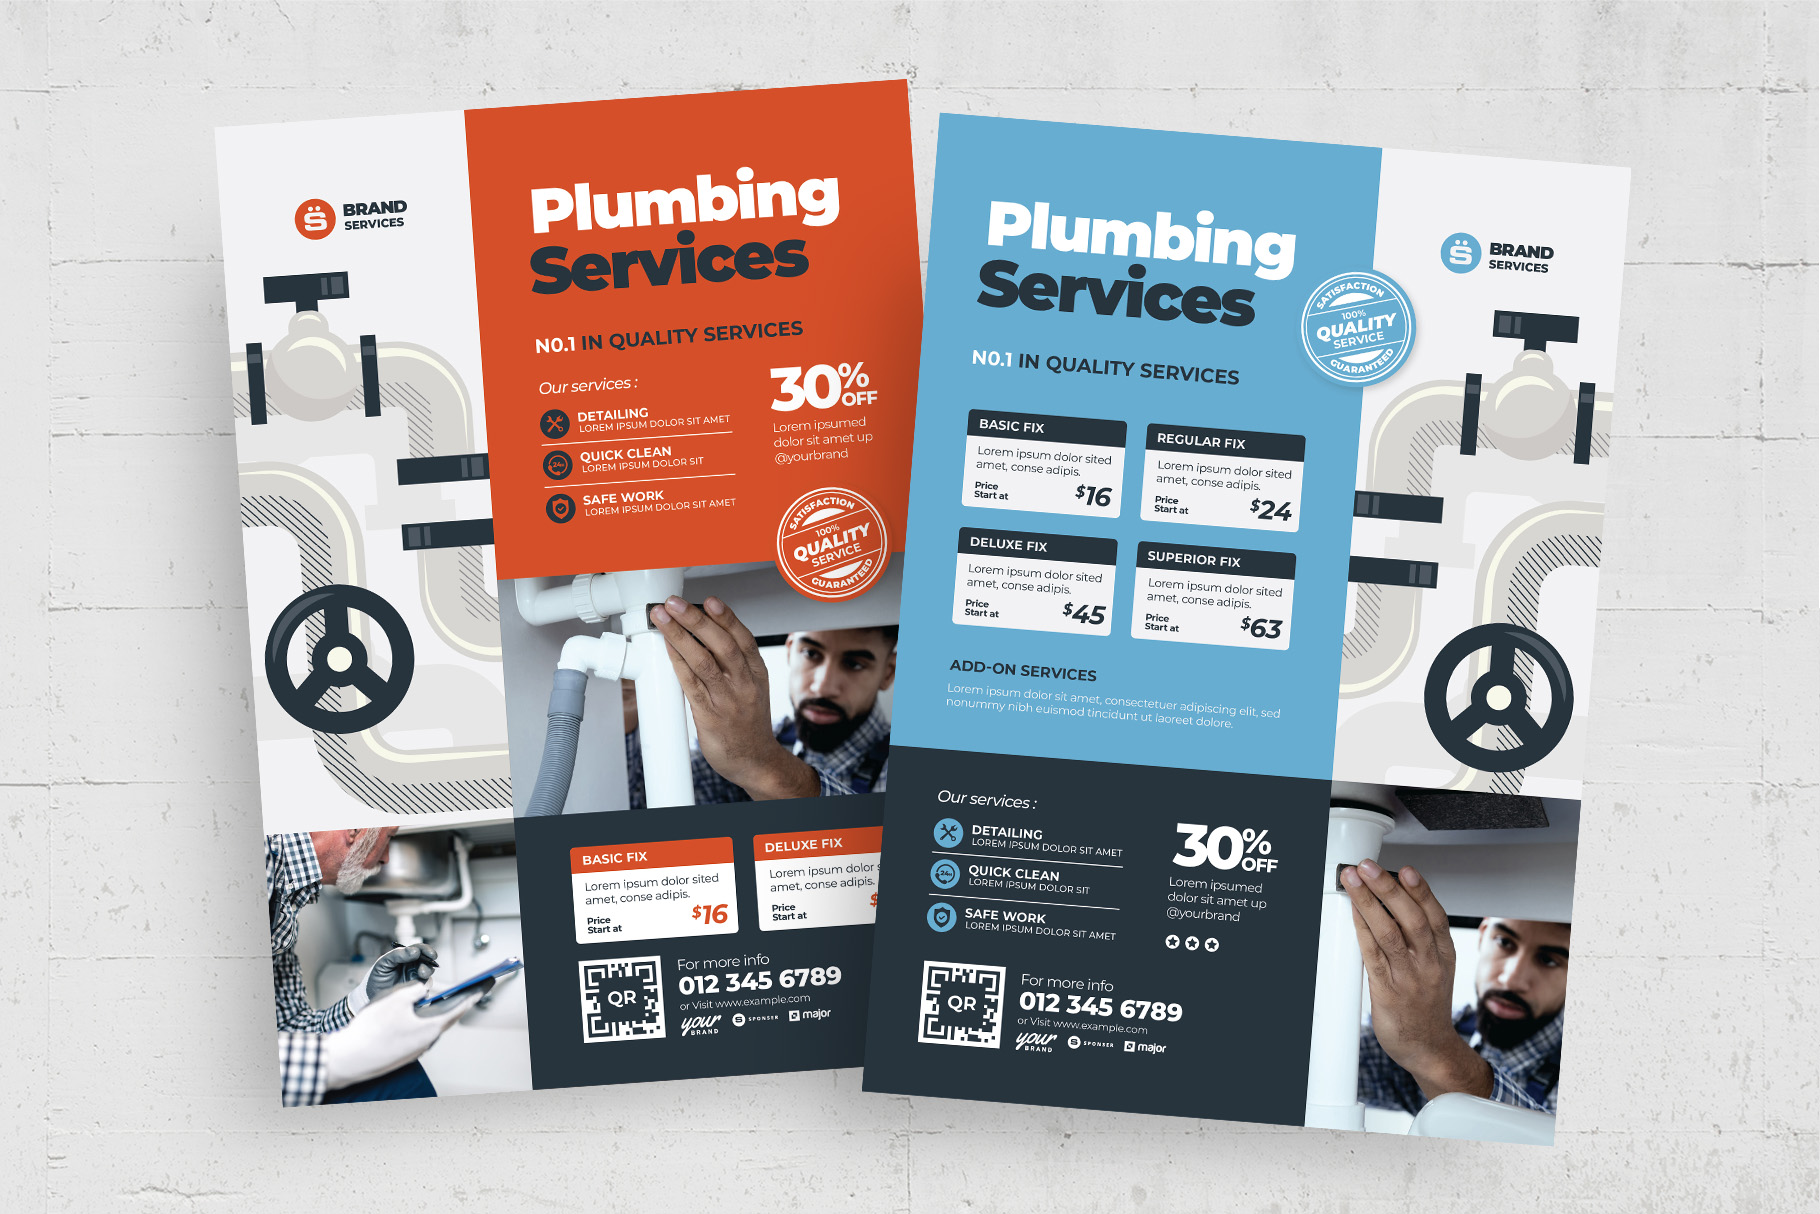 Plumbing Service Flyer Template (AI, EPS Format)